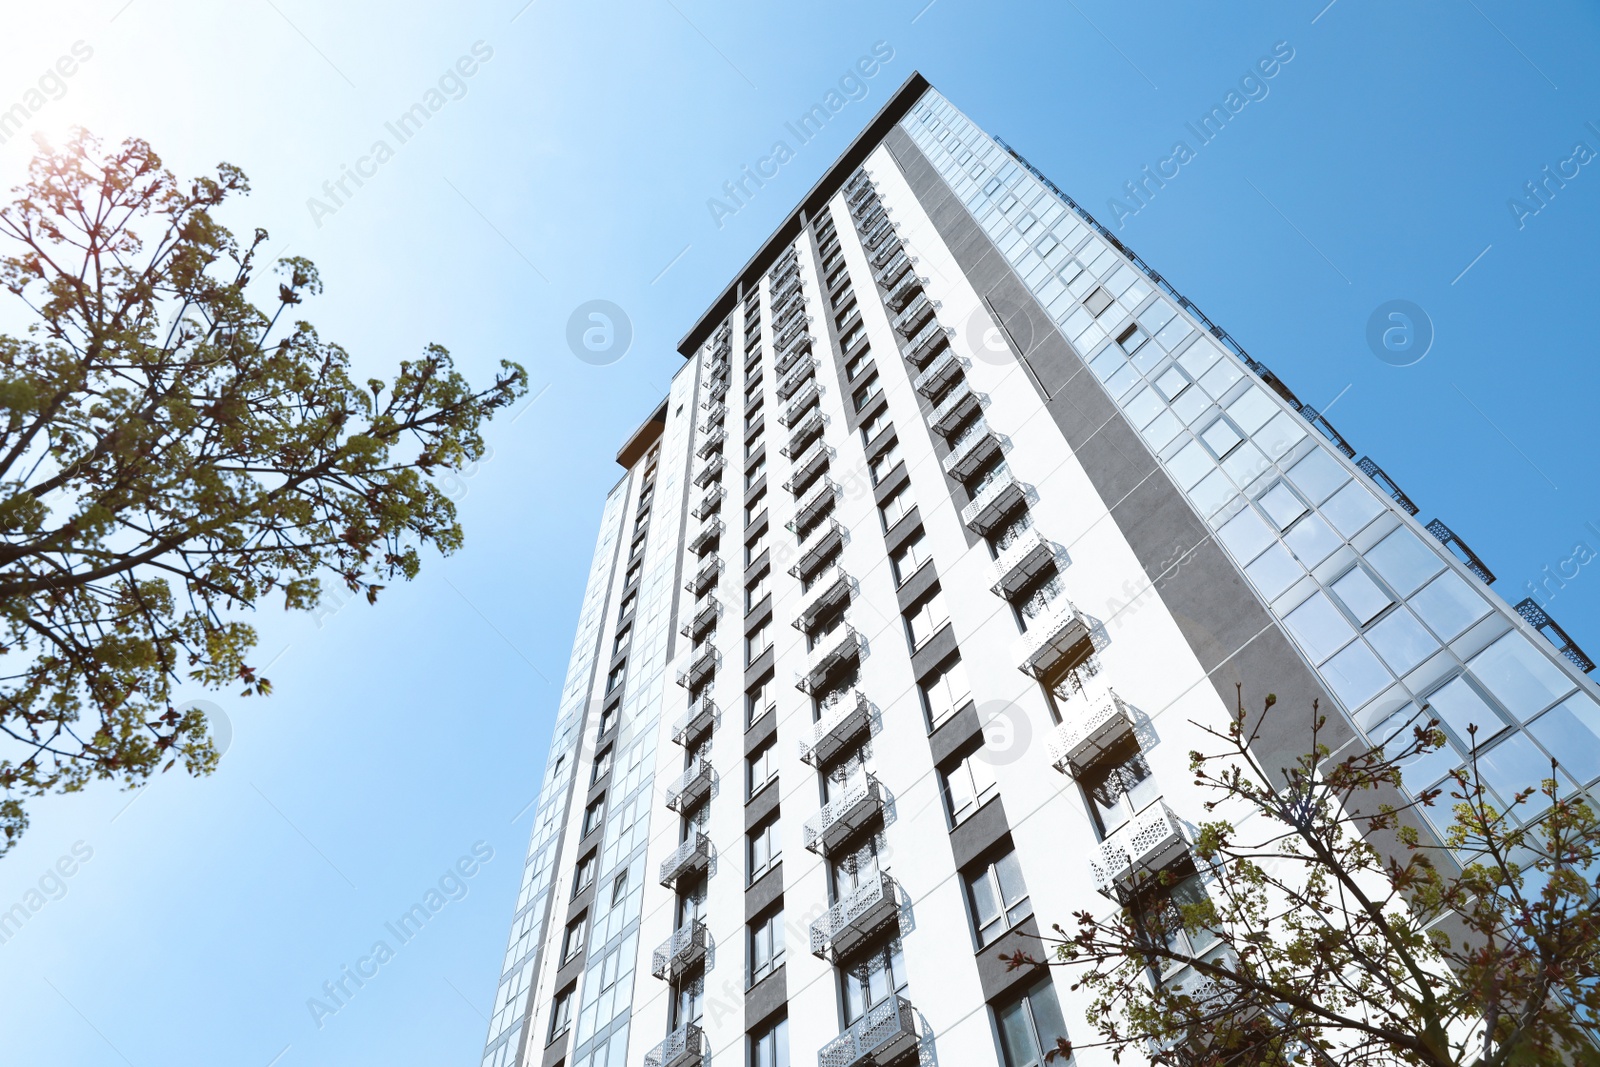 Photo of Low angle view of modern building against blue sky